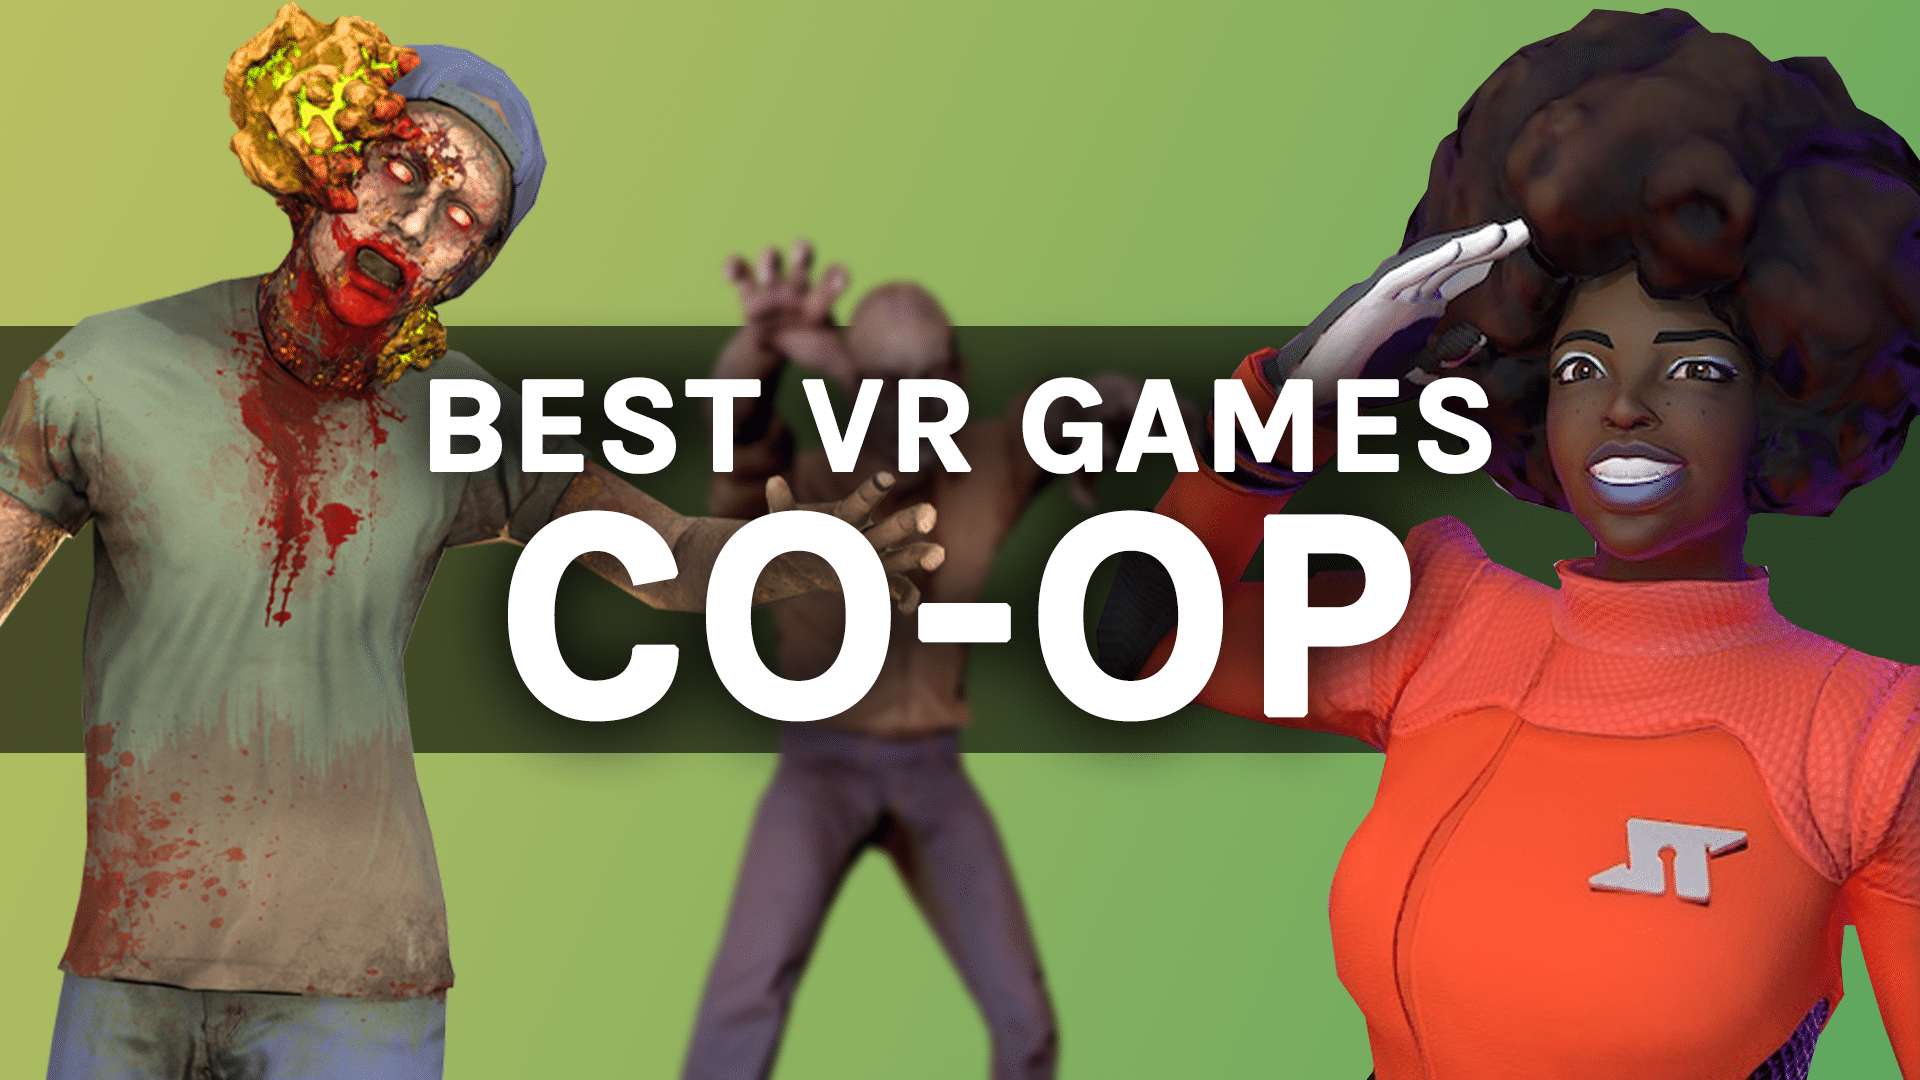 The Best Free Oculus Quest 2 Games